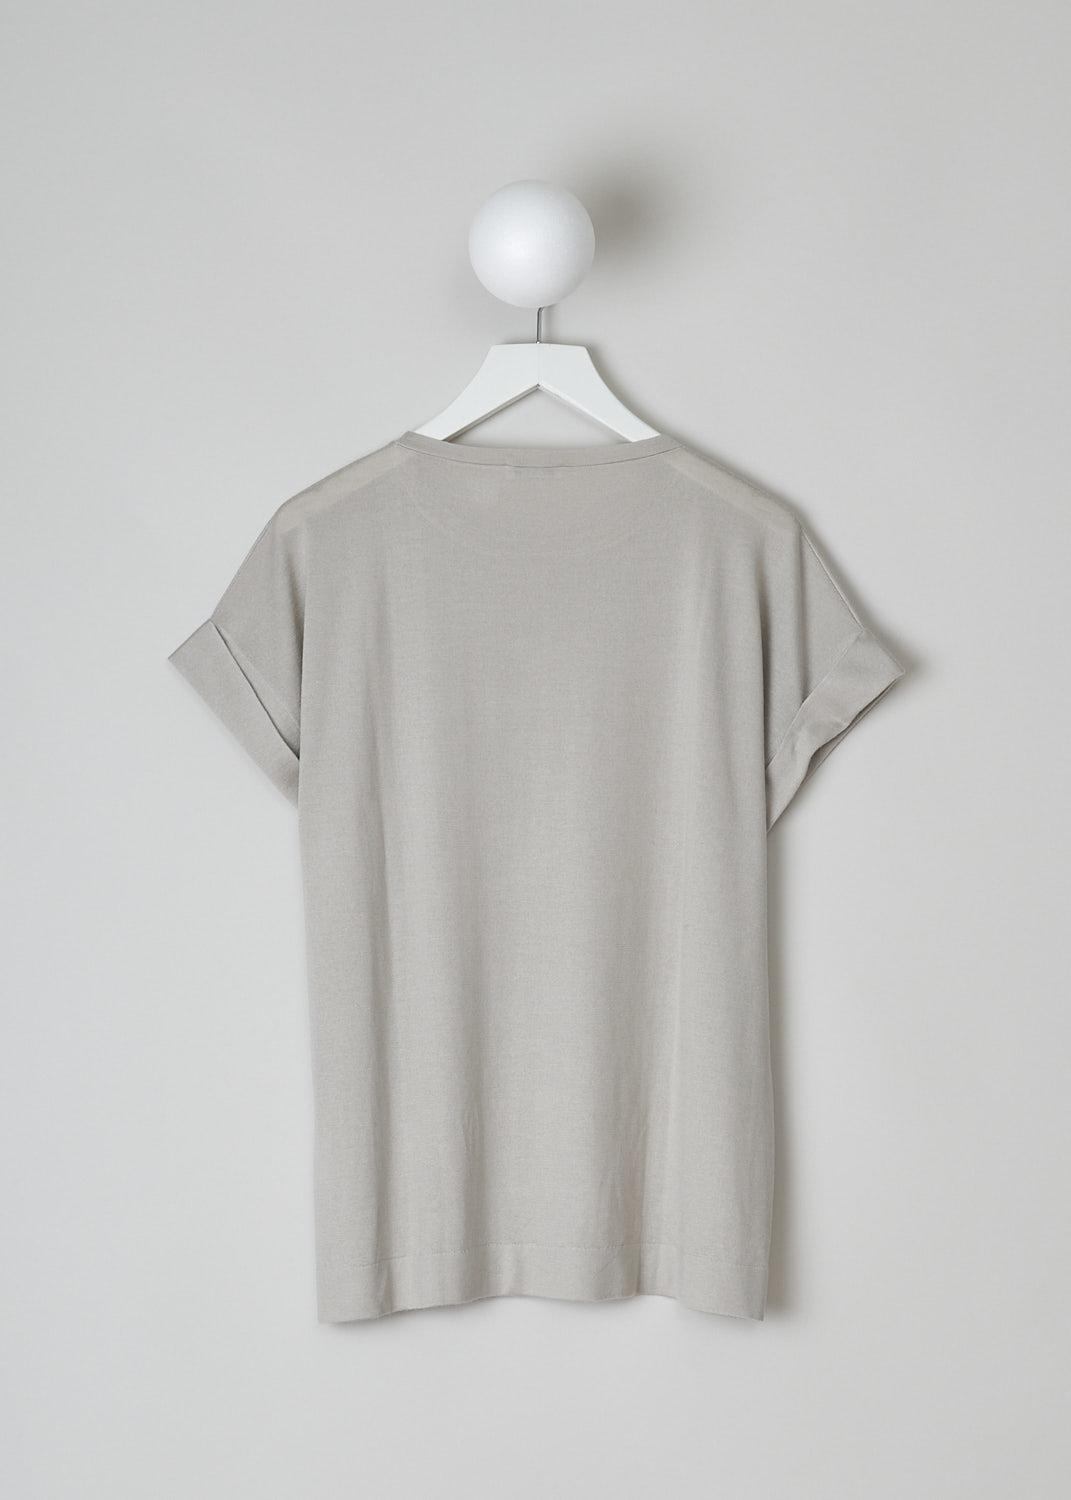 BRUNELLO CUCINELLI, GREY CASHMERE T-SHIRT, M13805900_C2428, Beige, Grey, Back, This pebble grey cashmere top has a round neckline and short folded sleeves. The top has a straight hemline. 
